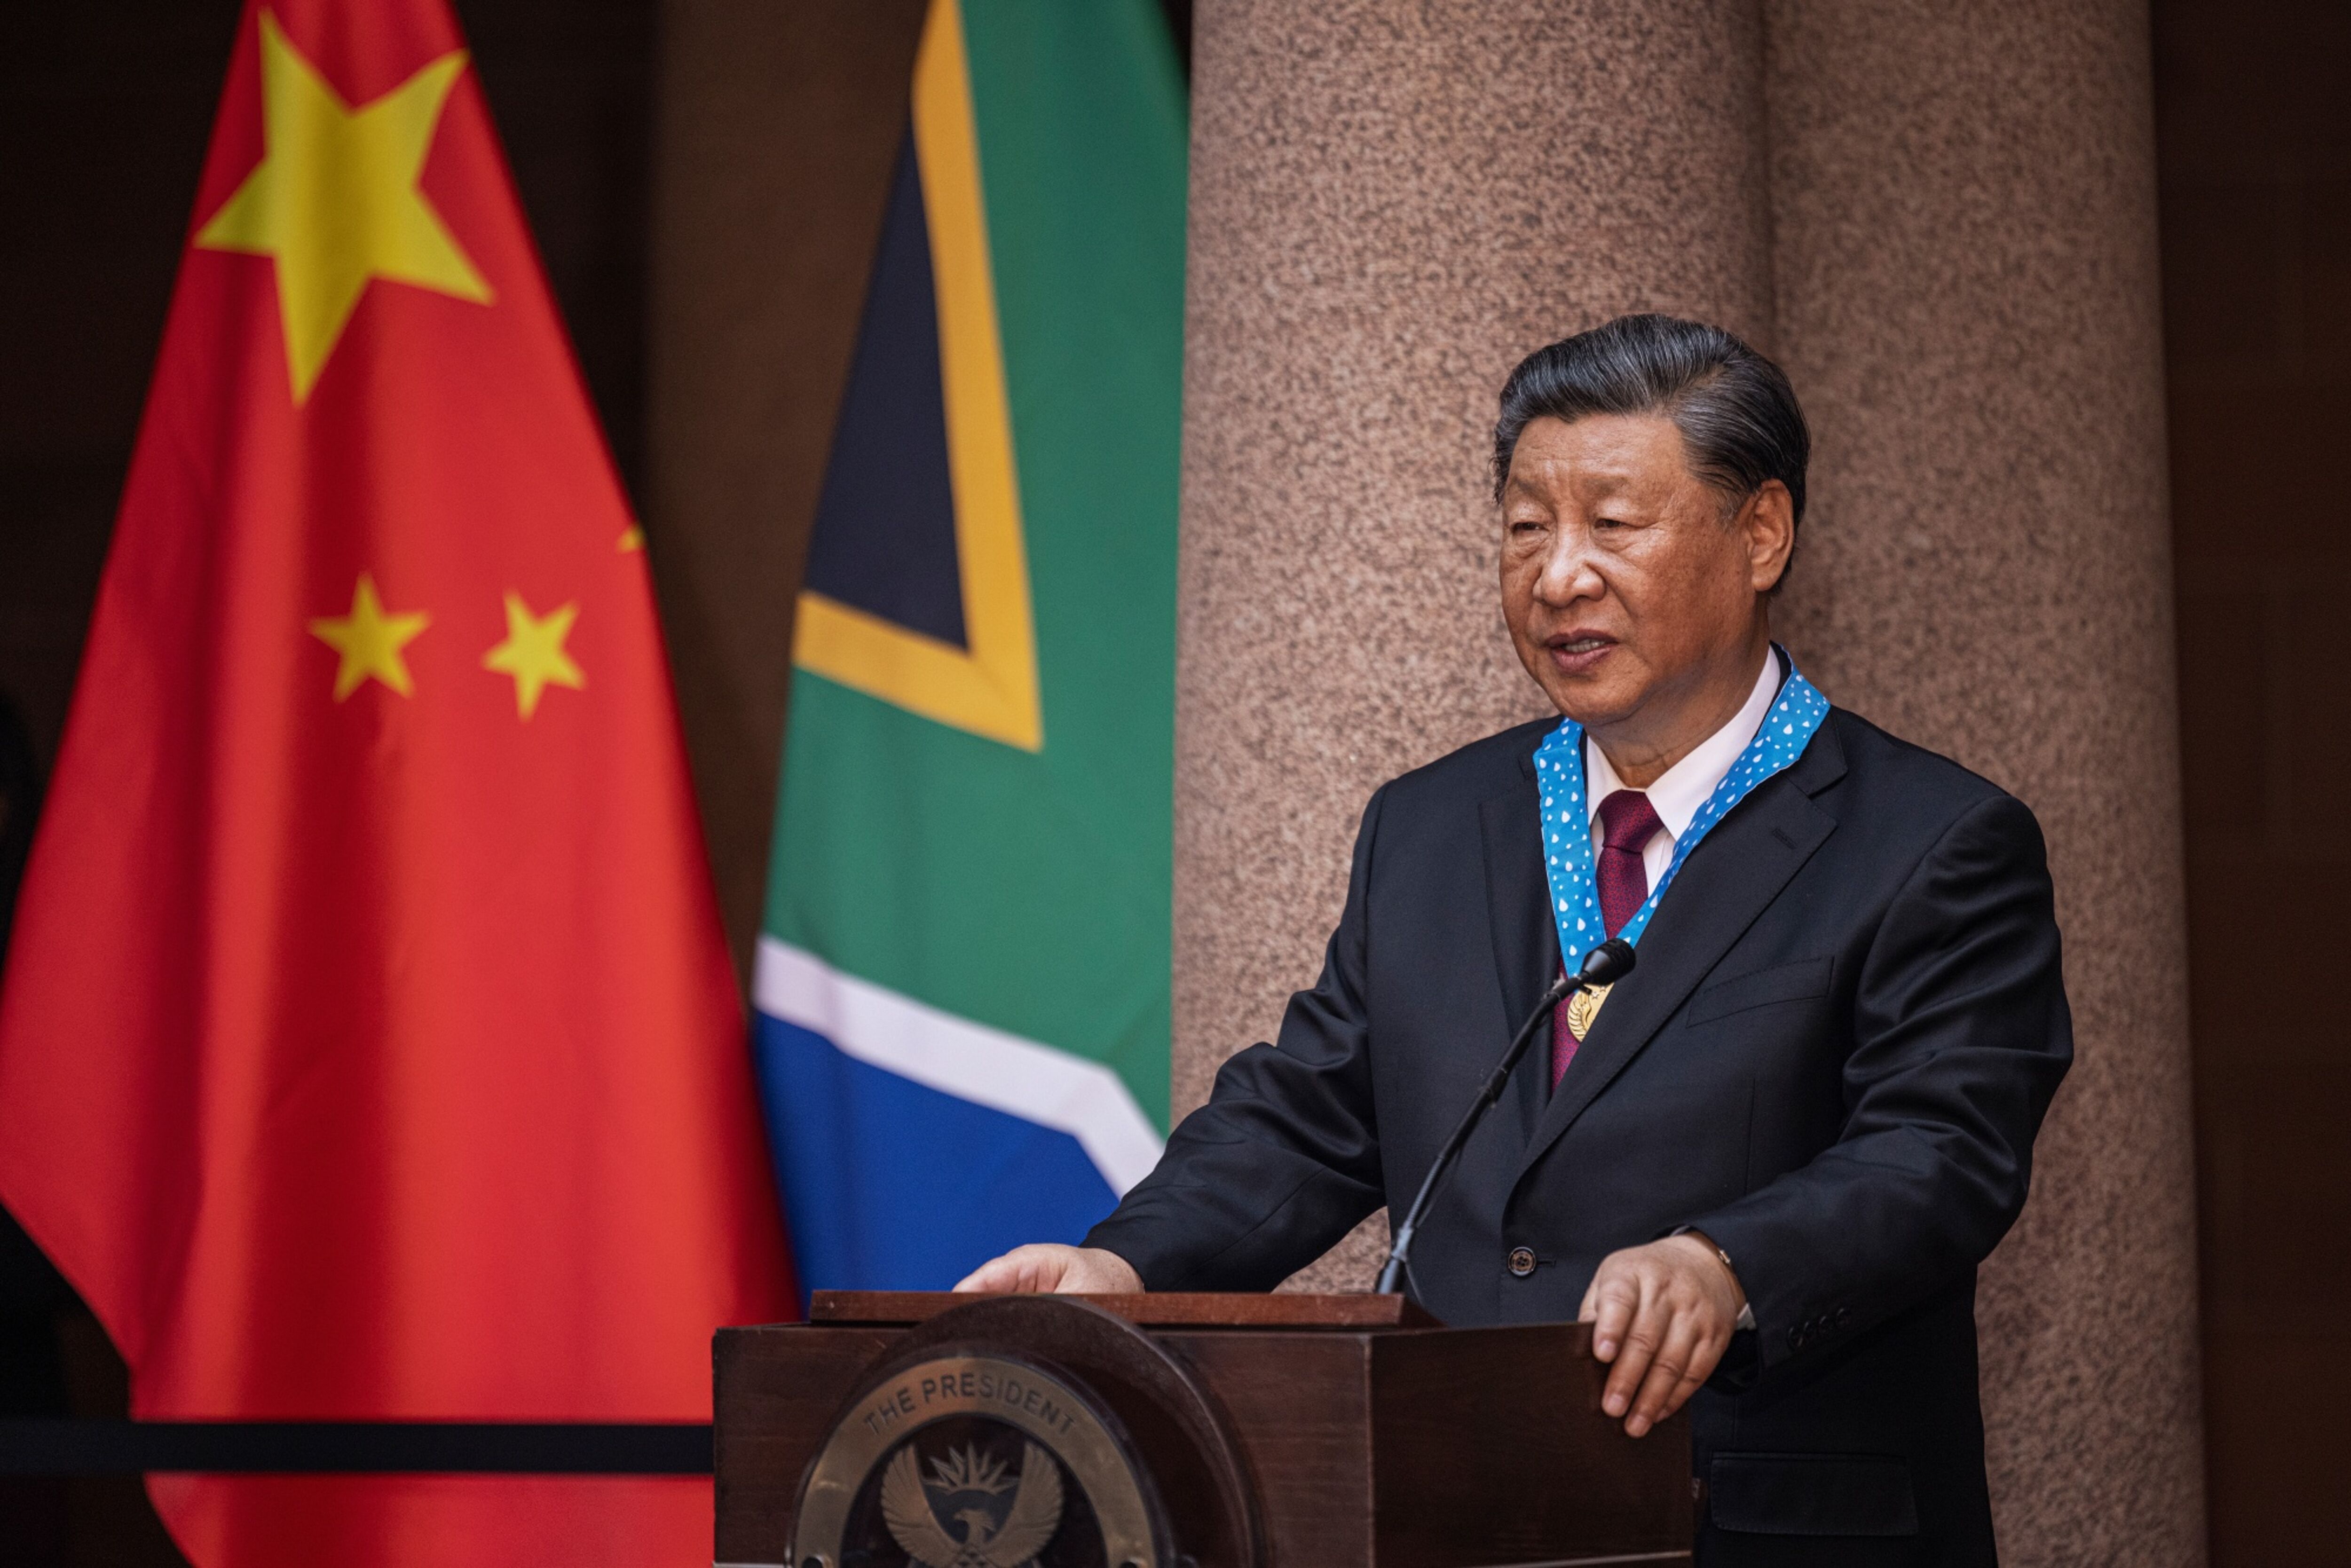 Xi Jinping, China's president, delivers a speech during a pre-BRICS summit 